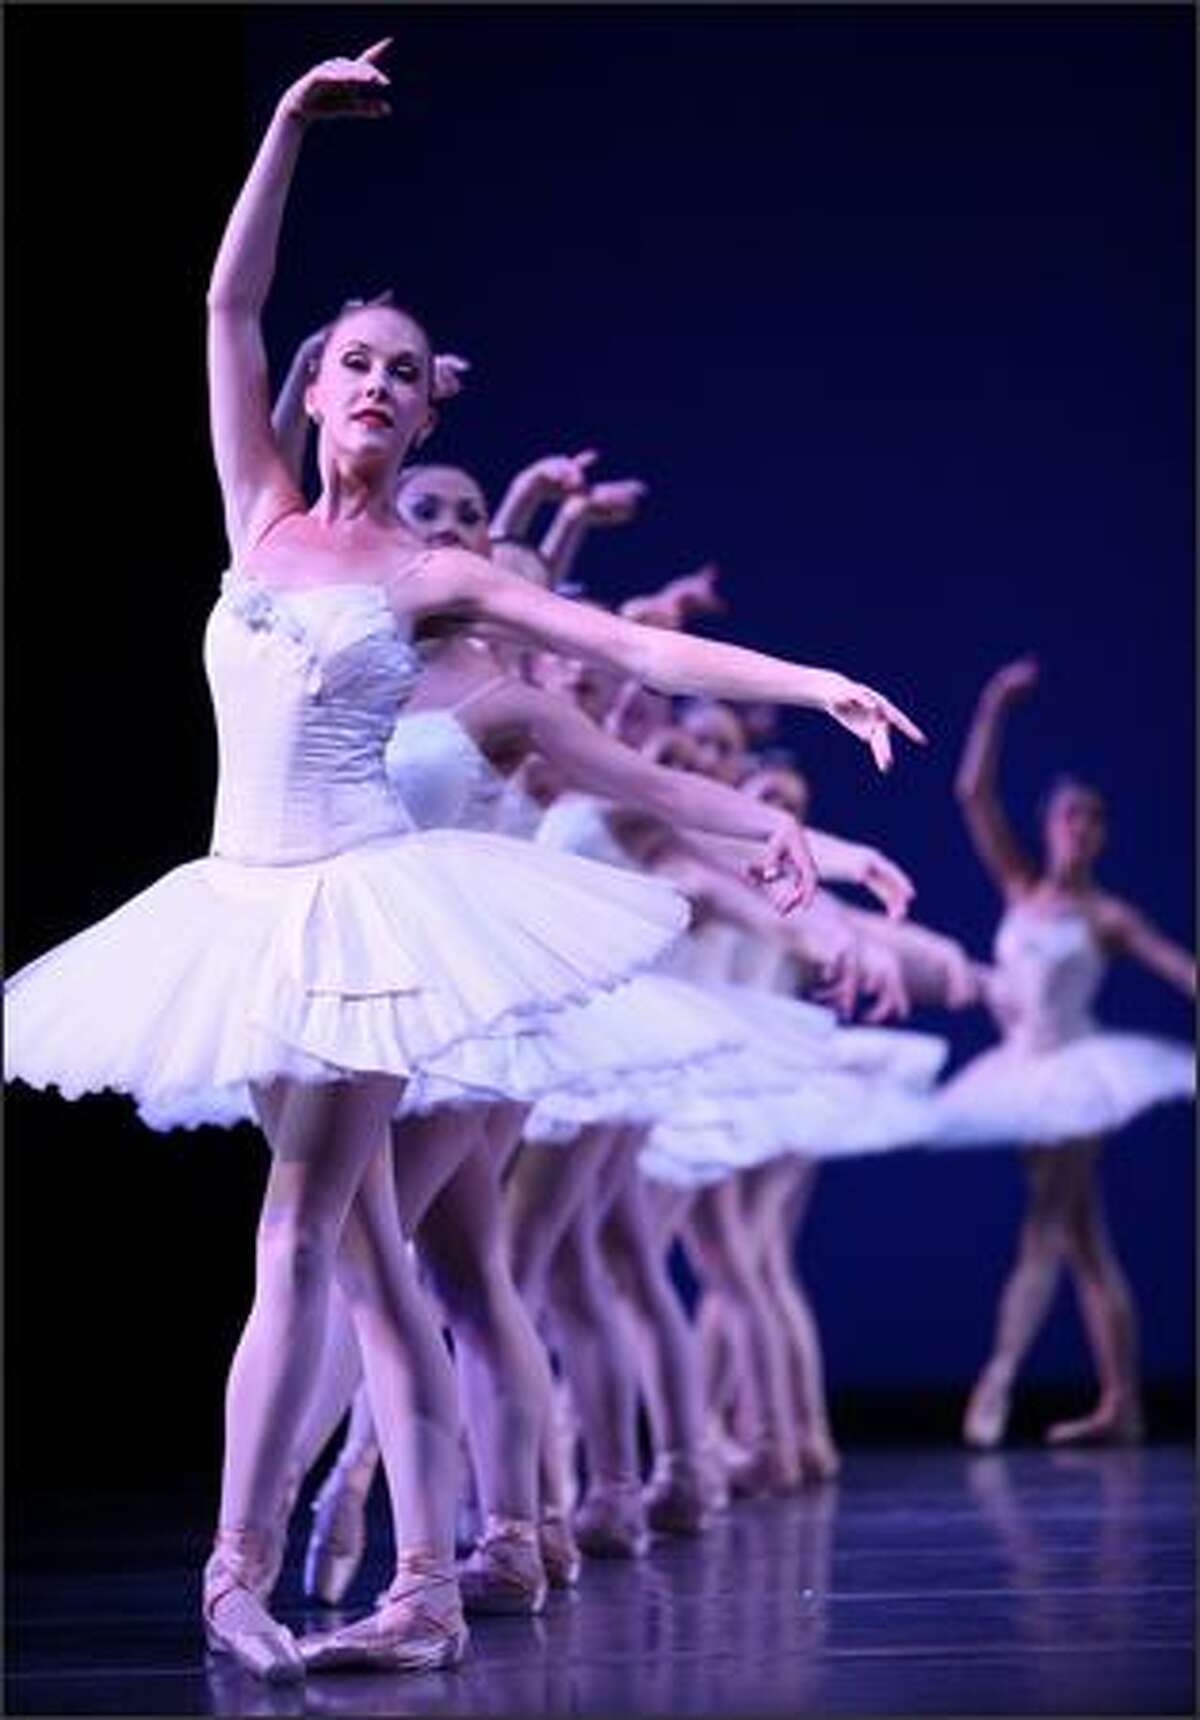 Corps de ballet dancer Kylee Kitchens and members of Pacific Northwest Ballet perform George Balanchine's "Symphony in C" during a dress rehearsal for the final program.